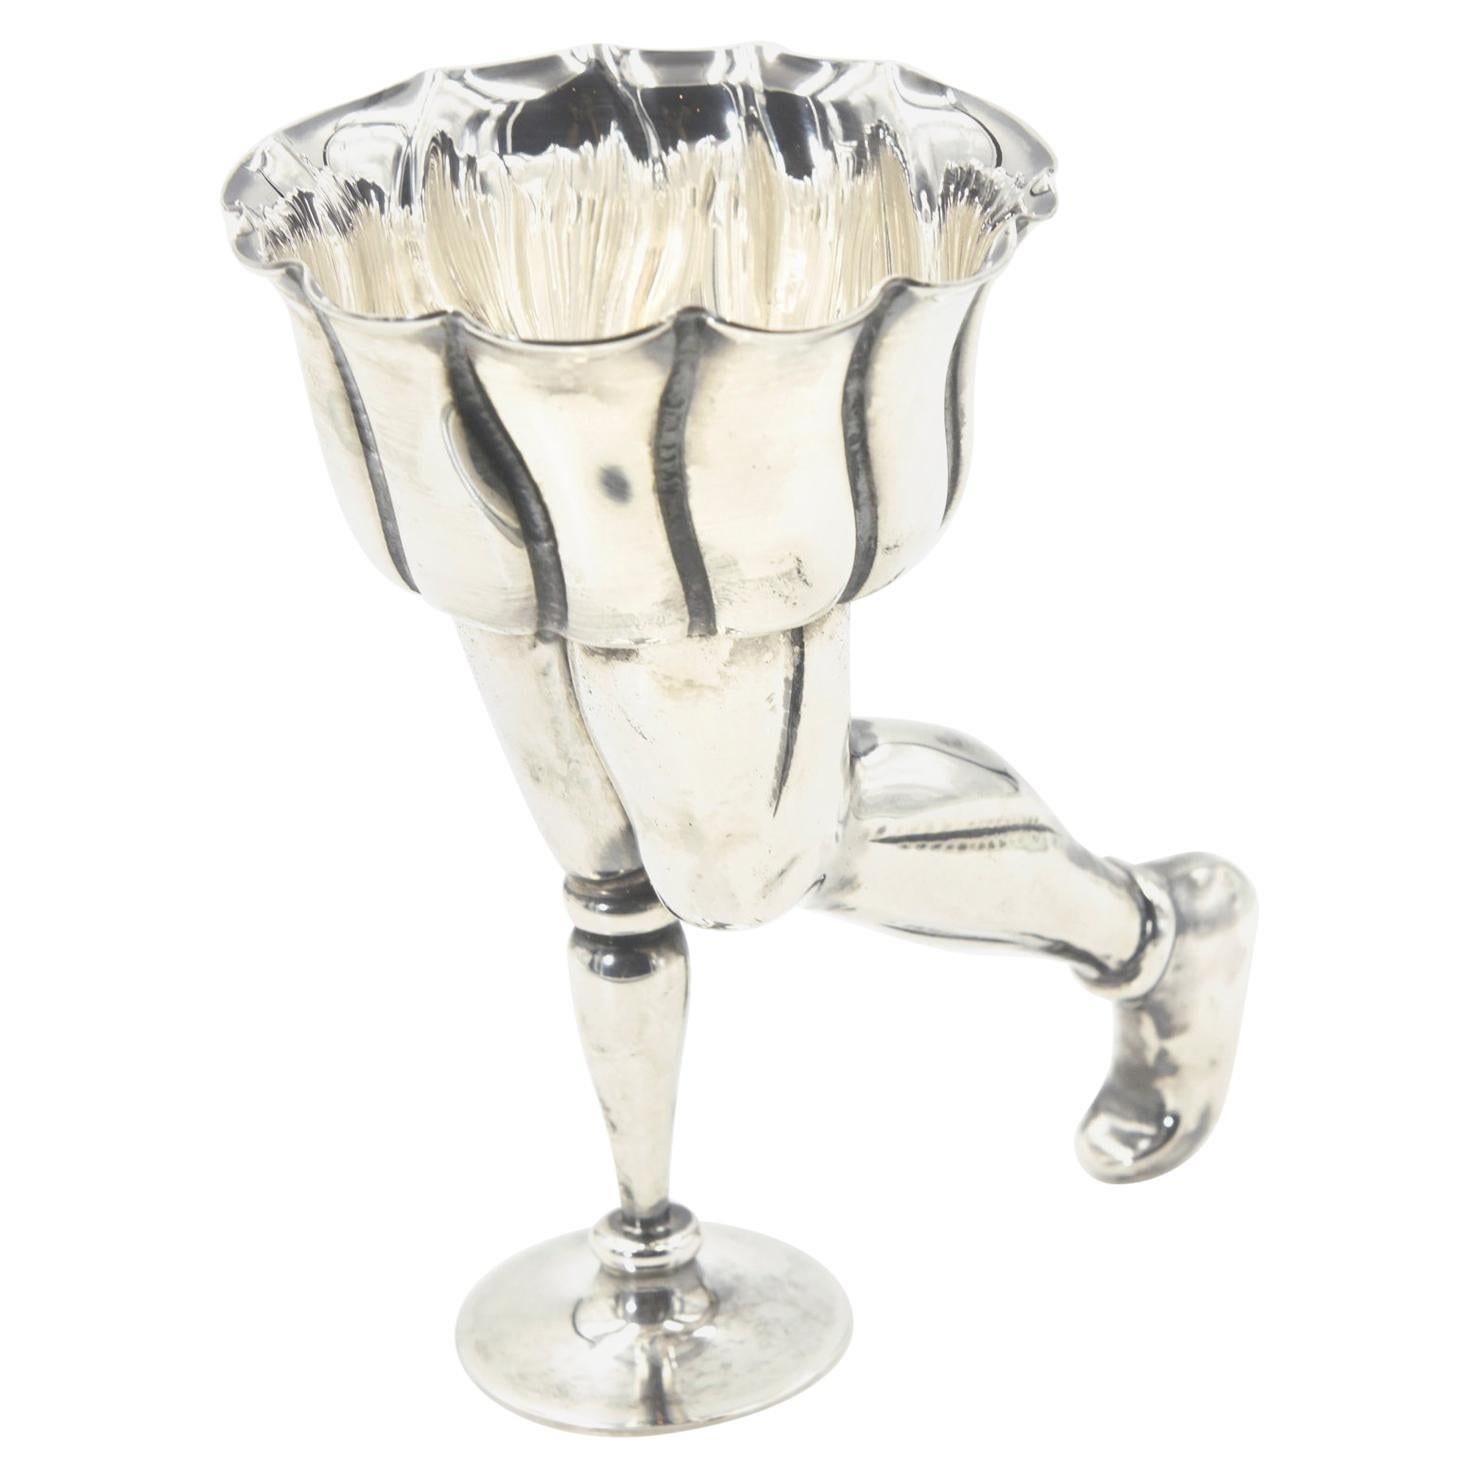 Rare Pampaloni Sterling Footed Figural Wine Cup from Bichierografia Collection